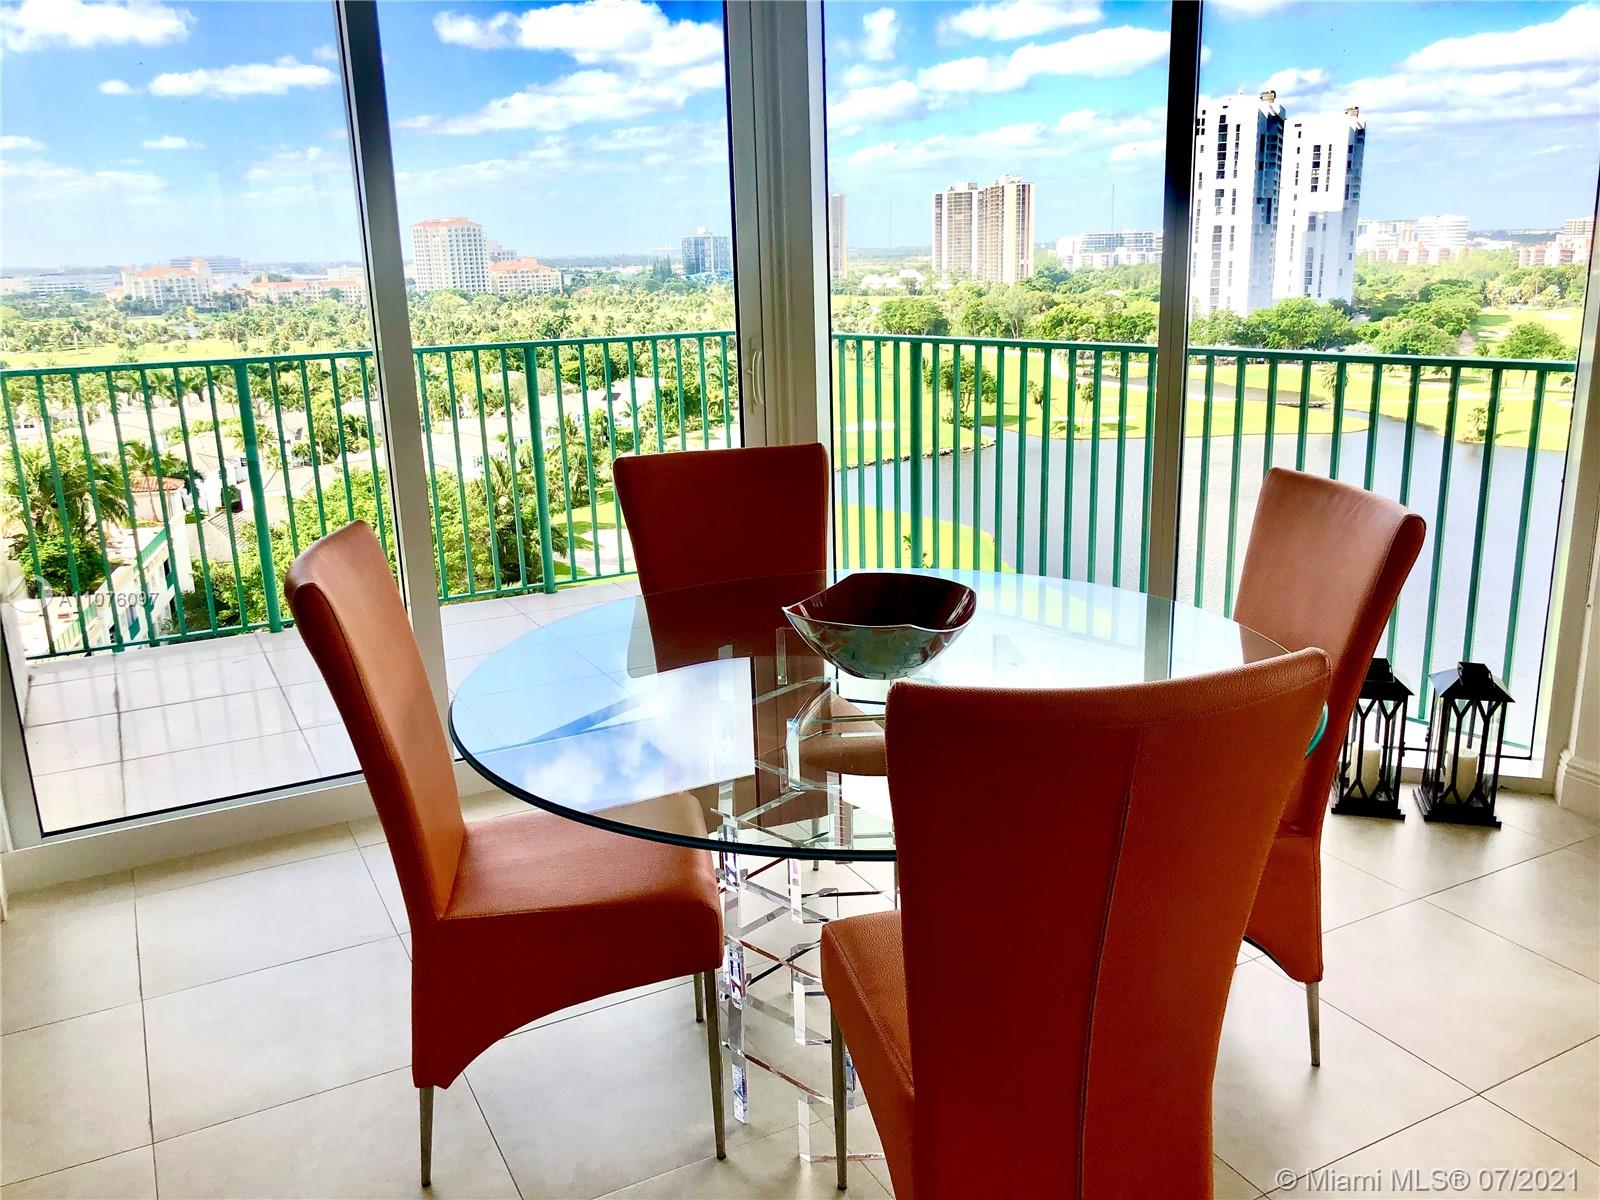 Photo 2 of Turnberry Vlg No Tower Co Apt 1208 in Aventura - MLS A11076097